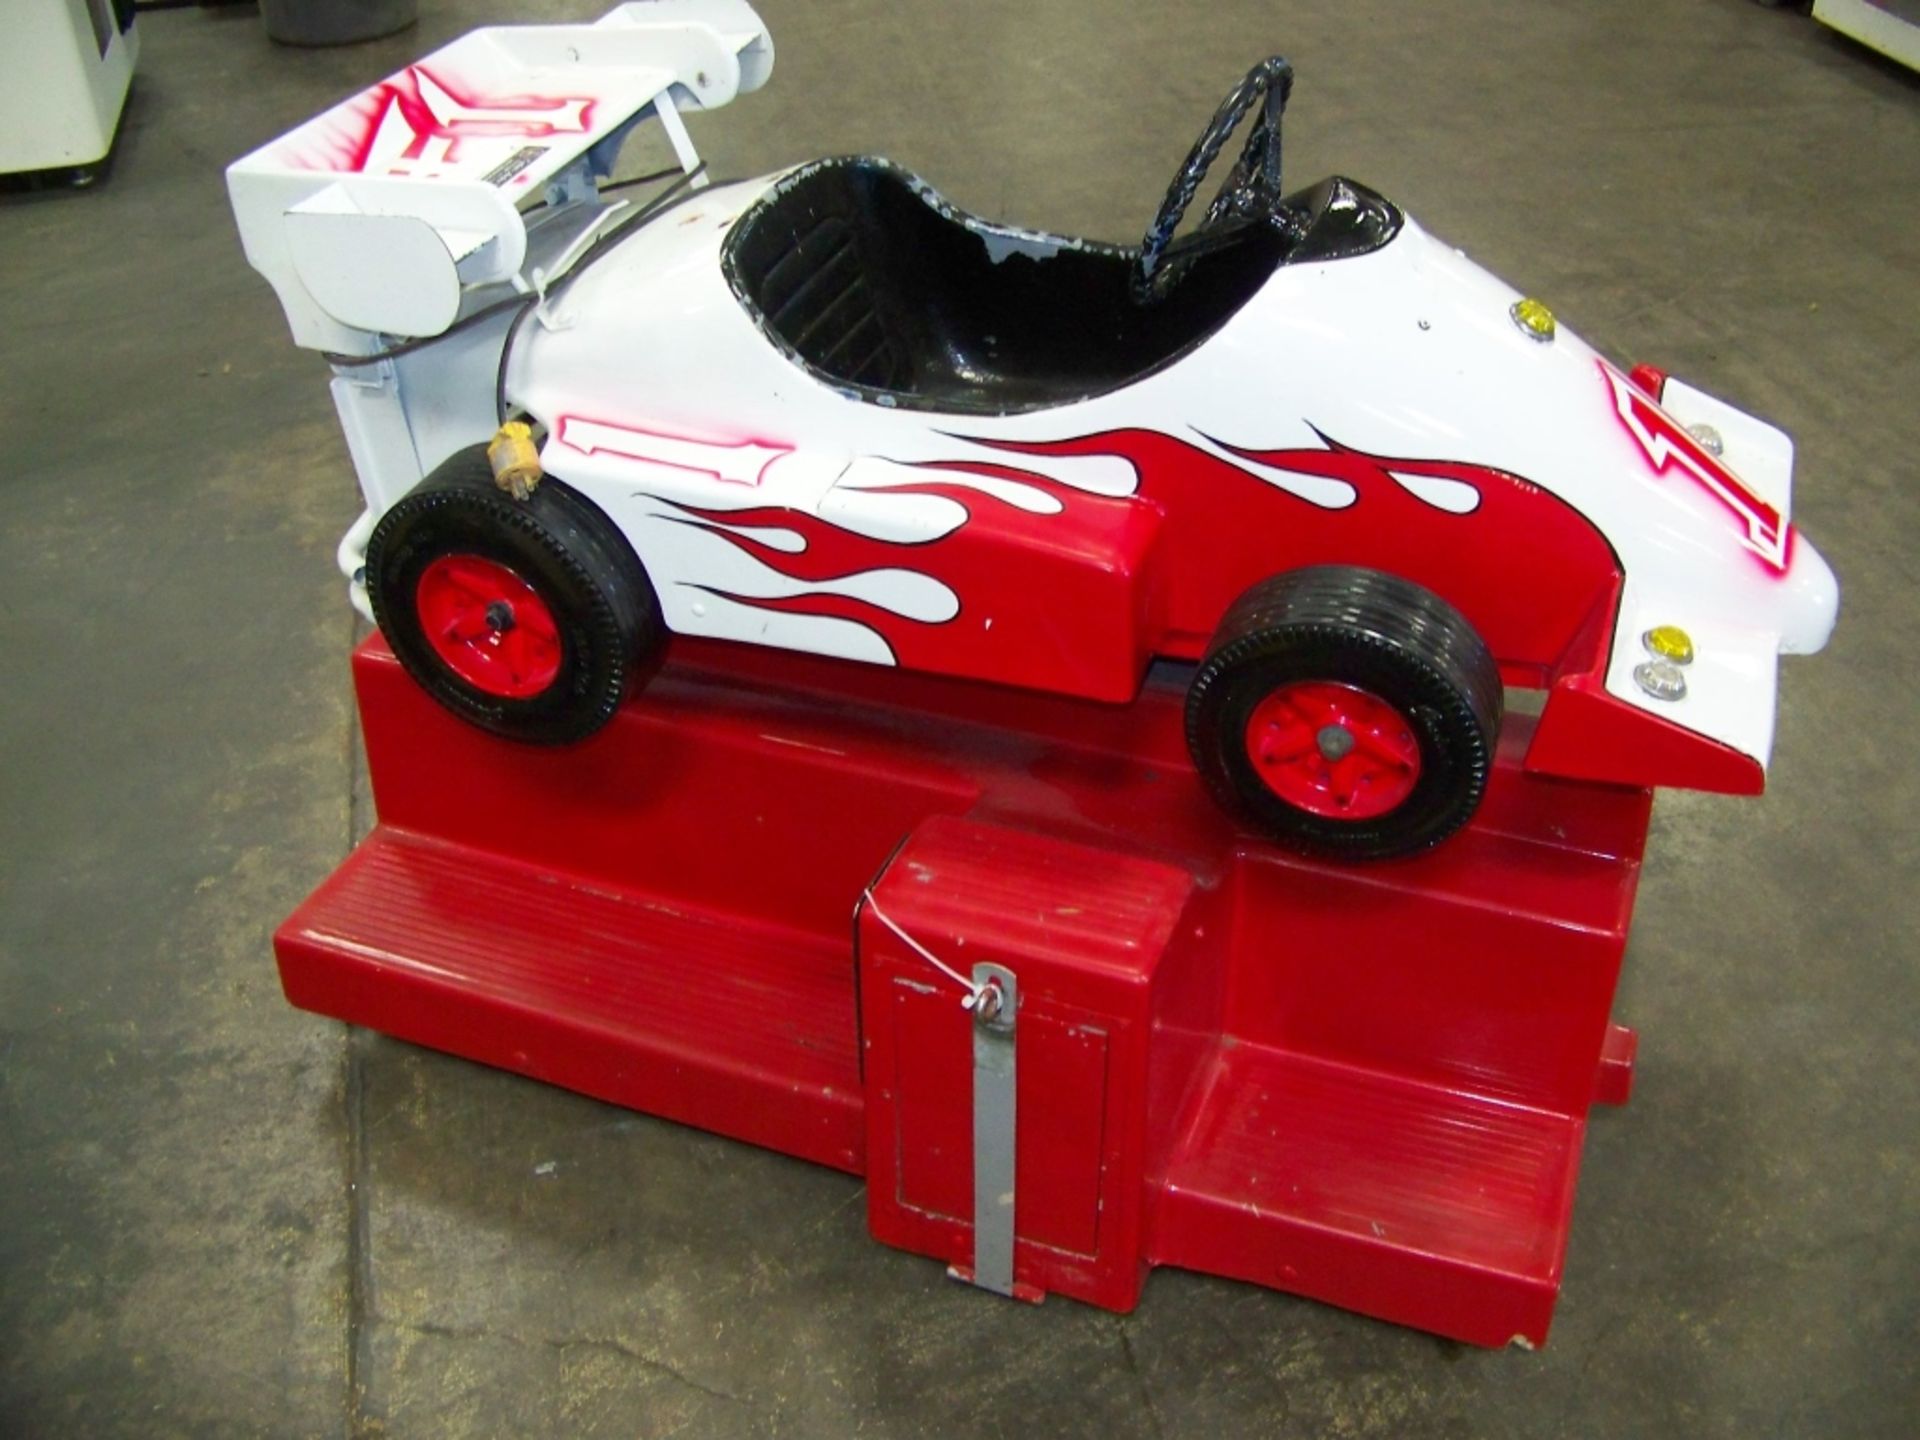 KIDDIE RIDE FORMULA ONE RACE CAR RED & WHITE - Image 2 of 2